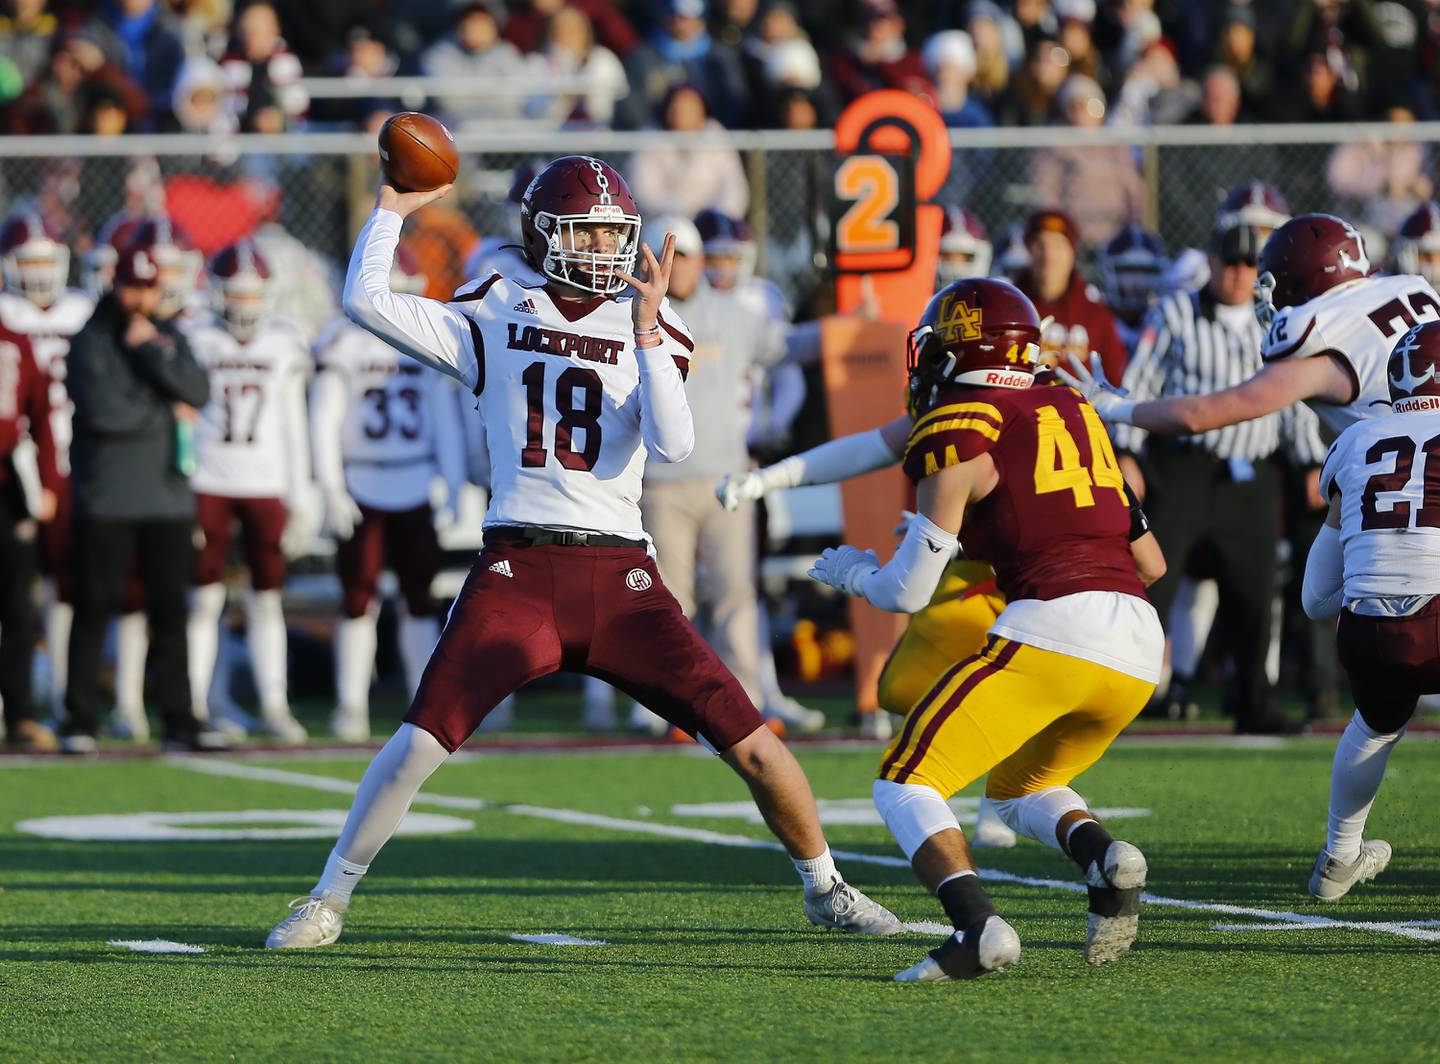 Lockport's Hayden Timosciek passes the ball during the IHSA Class 8A varsity football semifinal playoff game between Lockport Township and Loyola Academy on Saturday, November 20, 2021 in Wilmette.